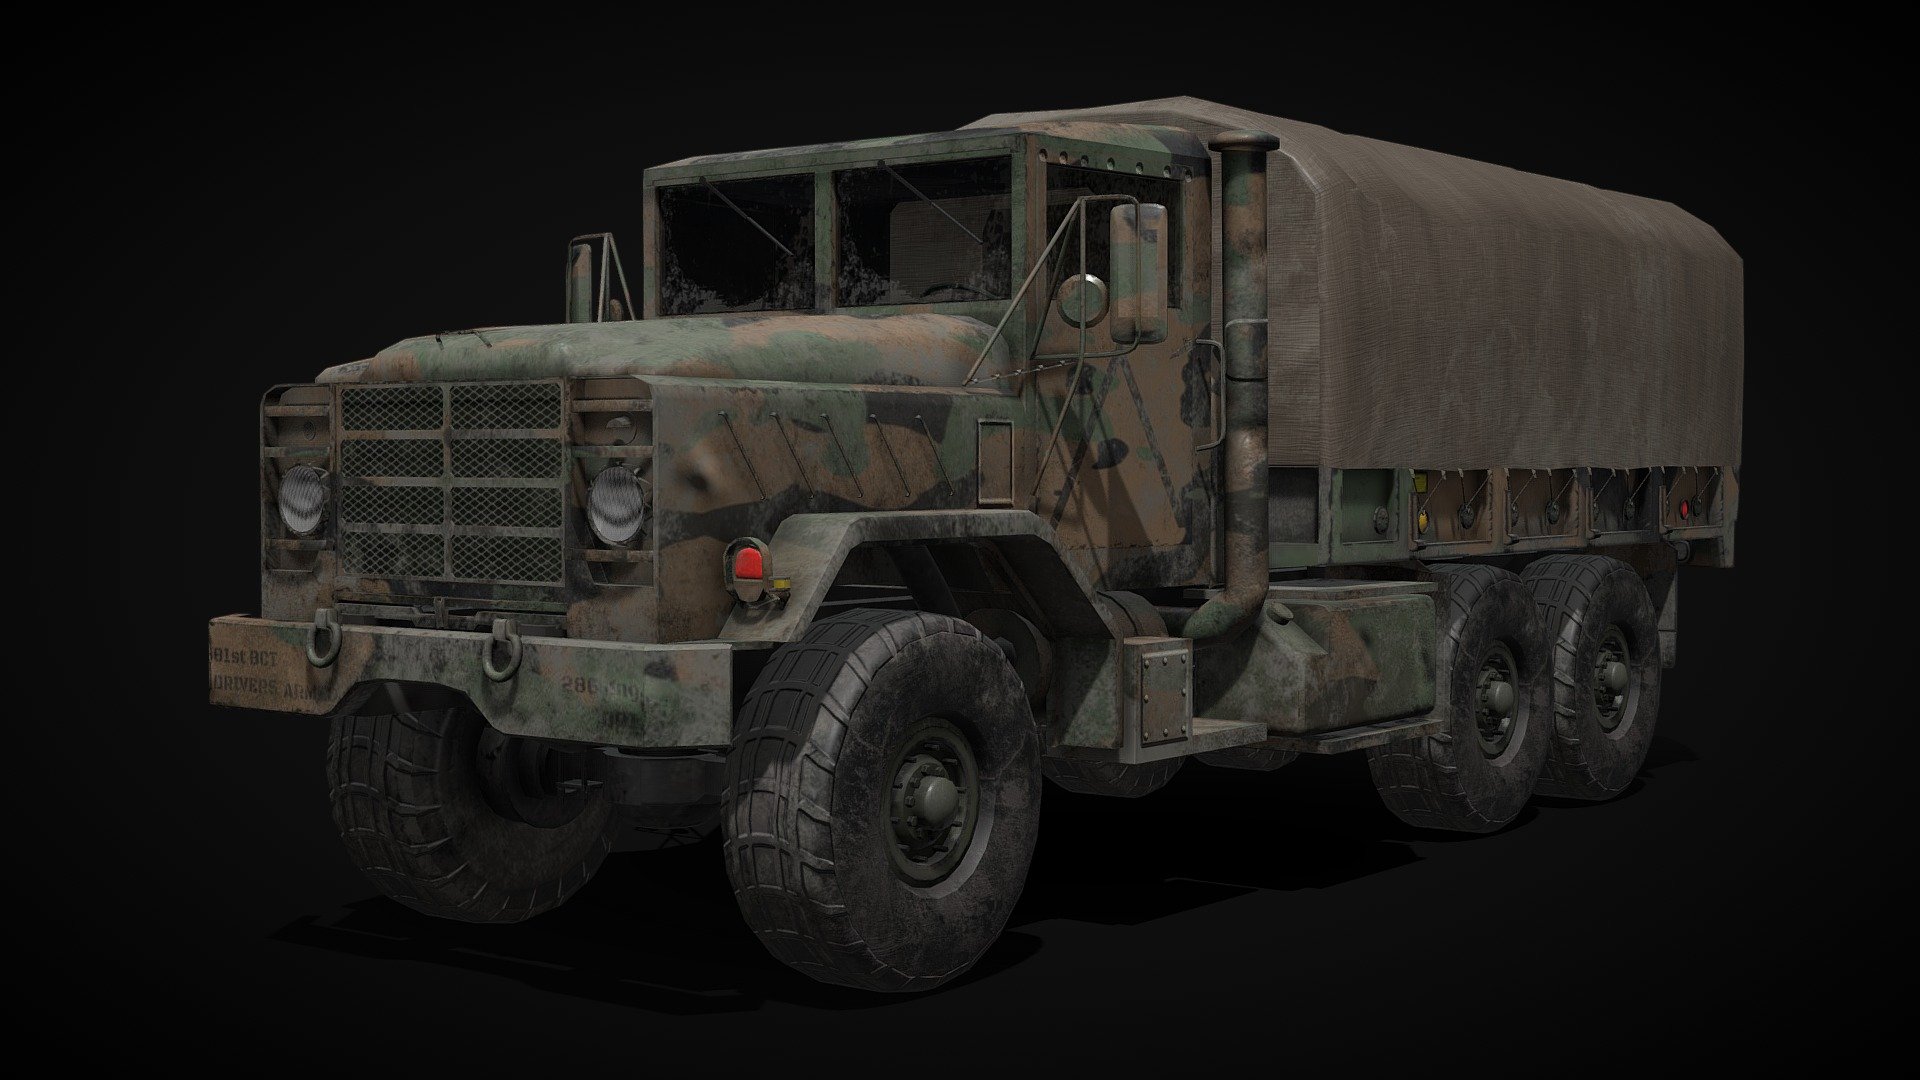 The m939 transport truck, 4x2048 textures, it is supposed to be a prop but it can be simply modified into a working variant. The model has interiors as well, the cover behind can be easily removed since its a separated piece 3d model